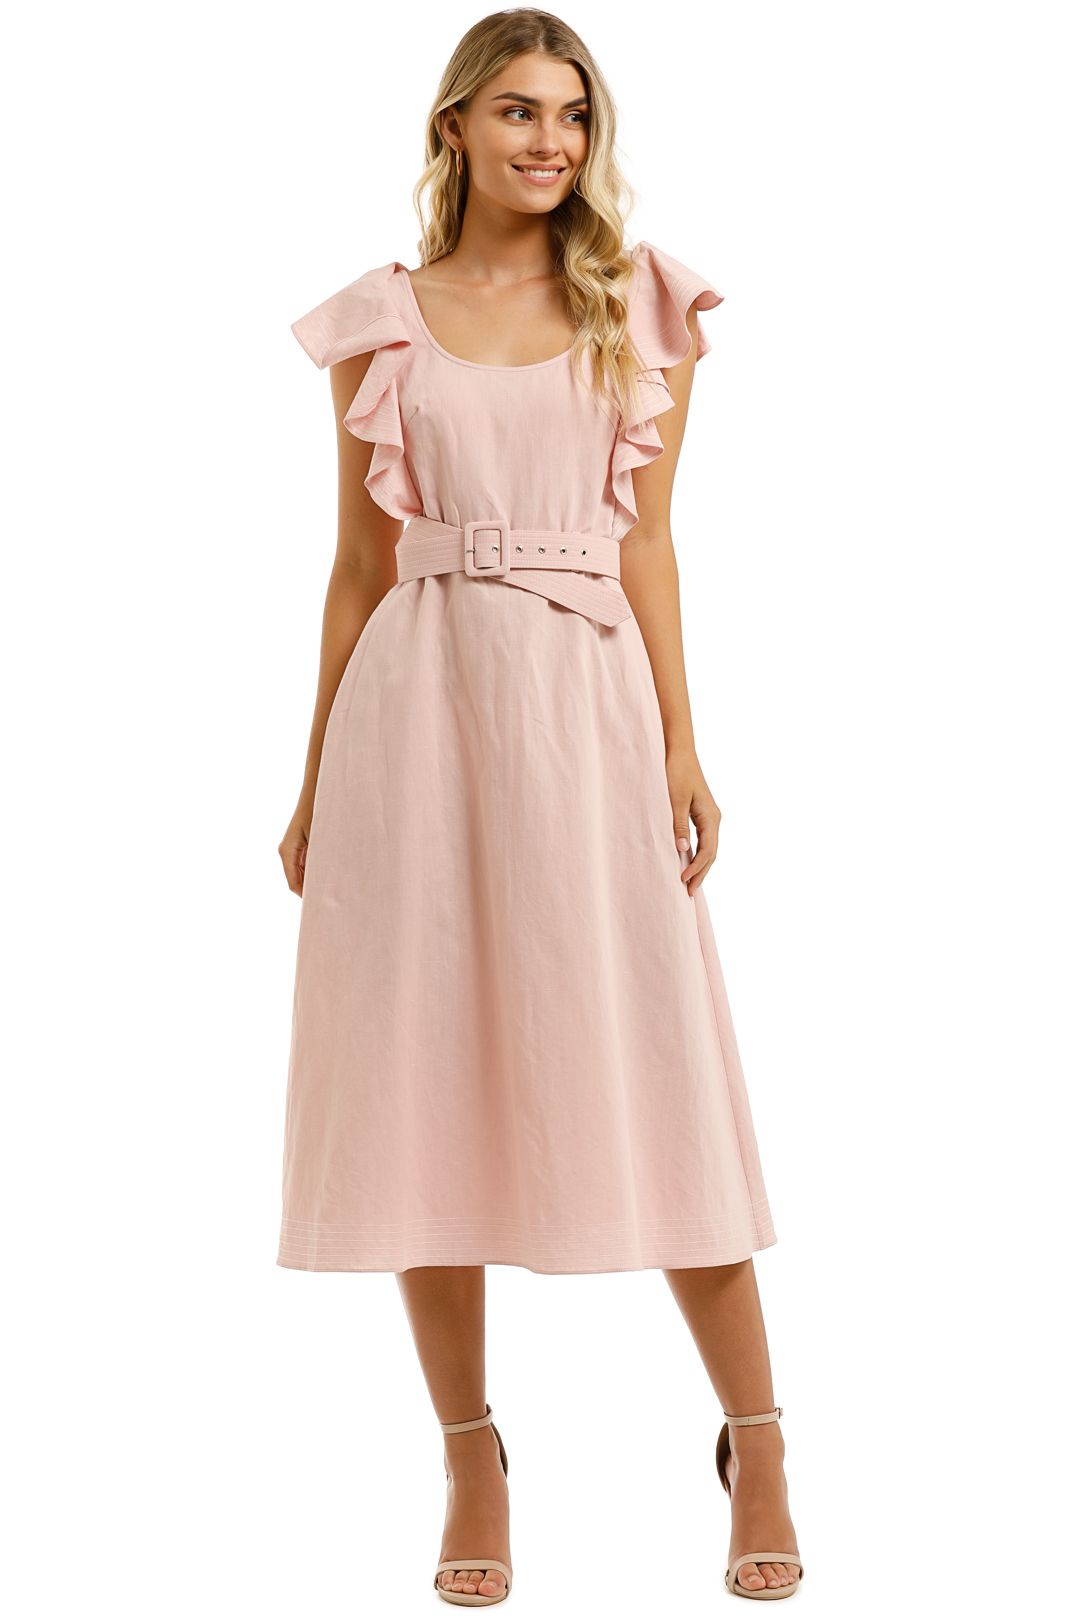 Leo-and-Lin-Amour-Ruffled-Sleeve-Dress-Blush-Front